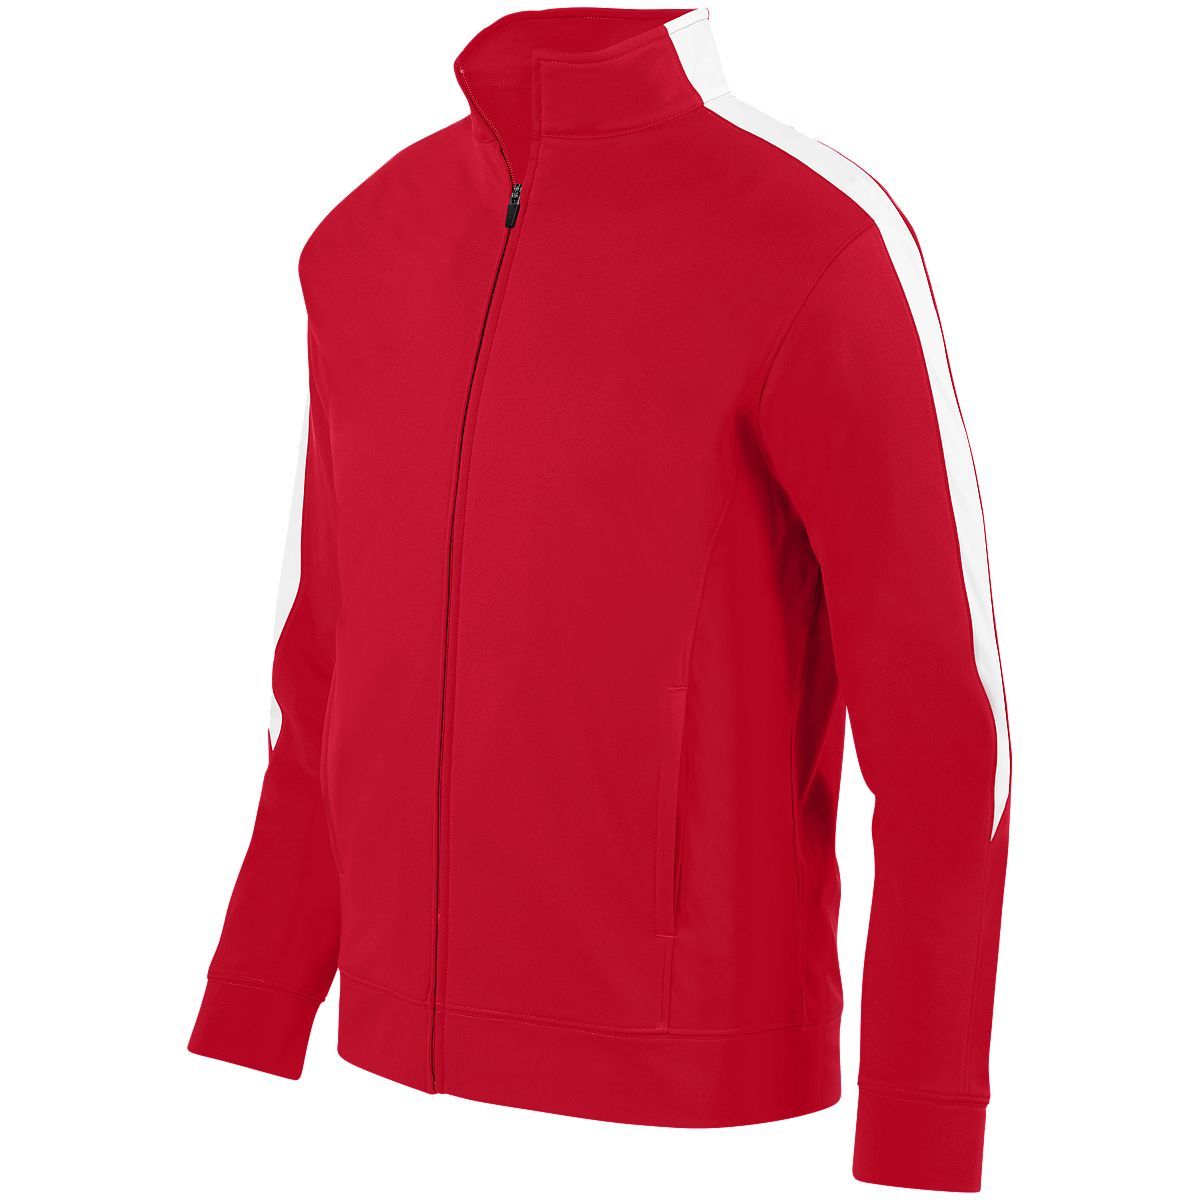 Augusta Sportswear Youth Medalist Jacket 2.0 in Red/White  -Part of the Youth, Youth-Jacket, Augusta-Products, Outerwear product lines at KanaleyCreations.com